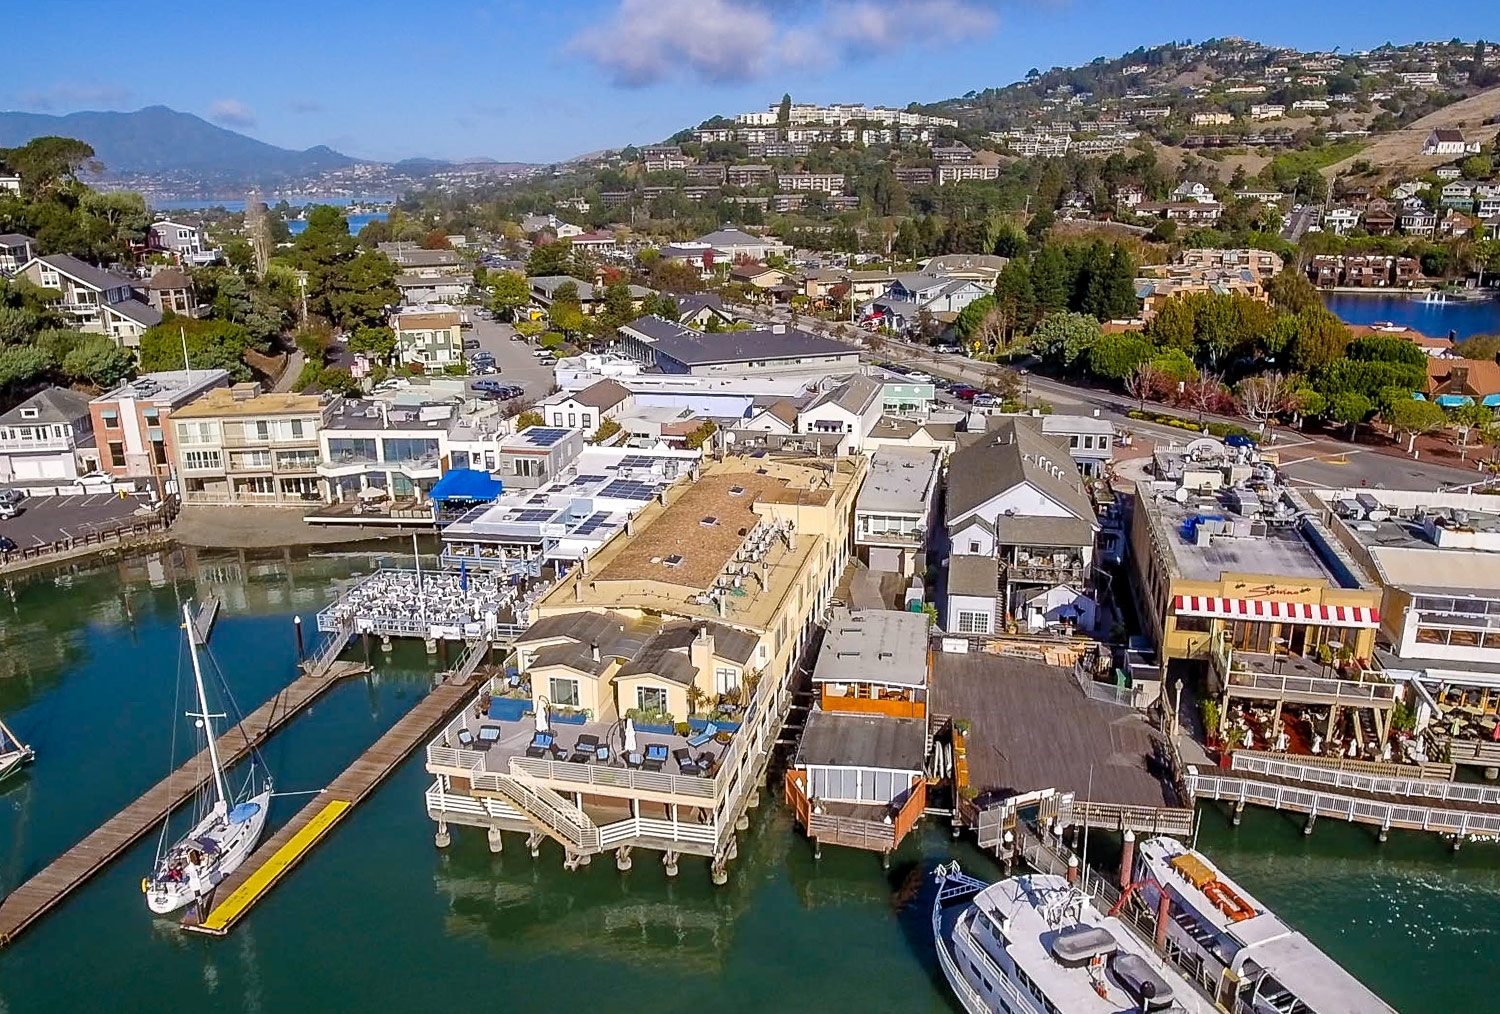 Aerial view of Waters Edge Hotel on the historic dock with a bayside deck for beautiful views of boats and homes on Corinthian Island1-7995.jpg